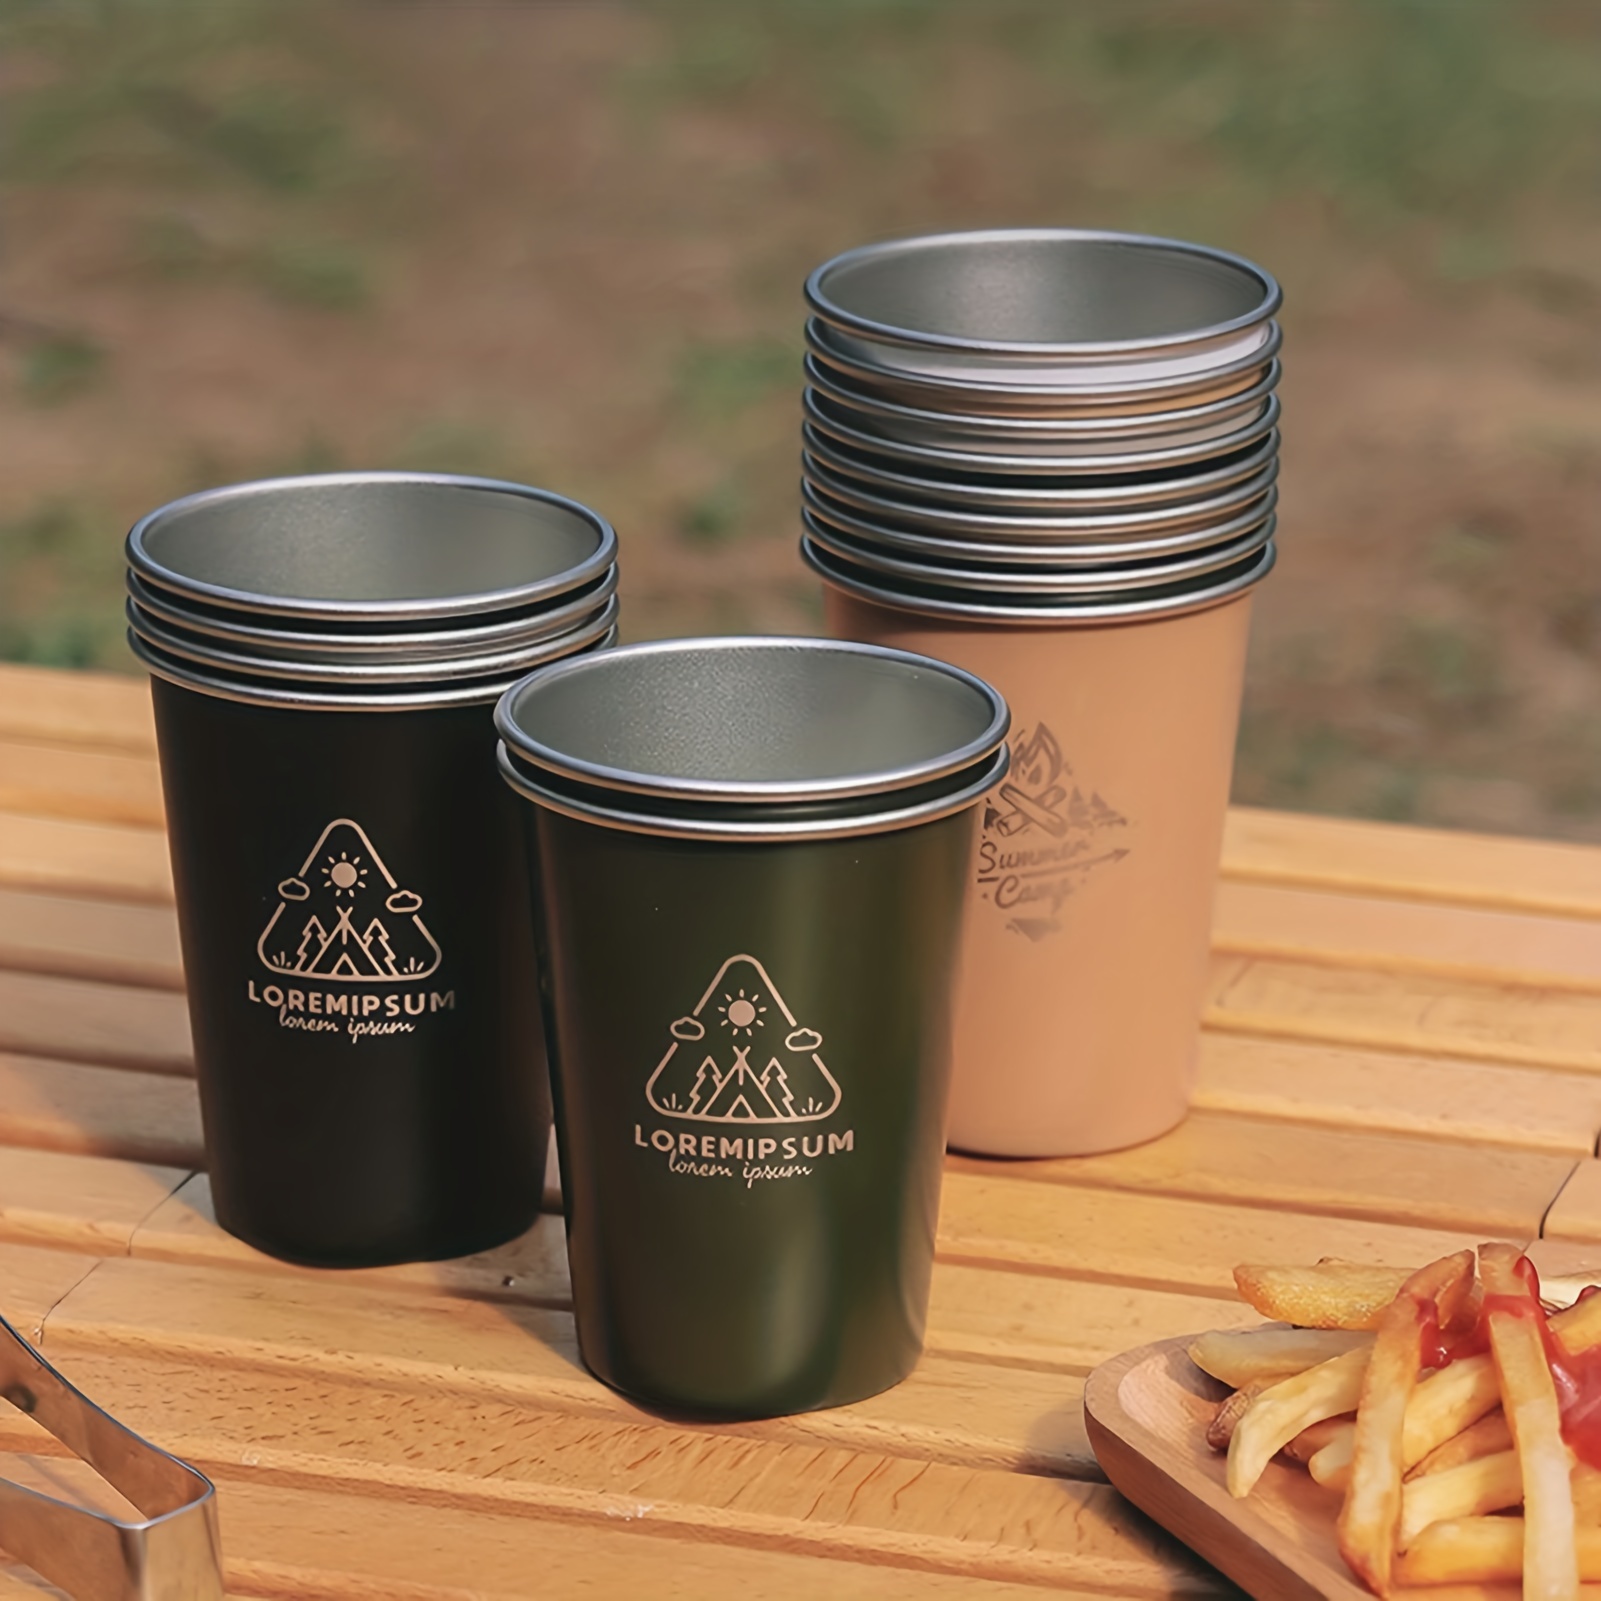 Premium Stainless Steel Cups 350ml Stainless Steel Water Cup (4 Pack)  Premium Metal Cups - Stackable Durable Cup